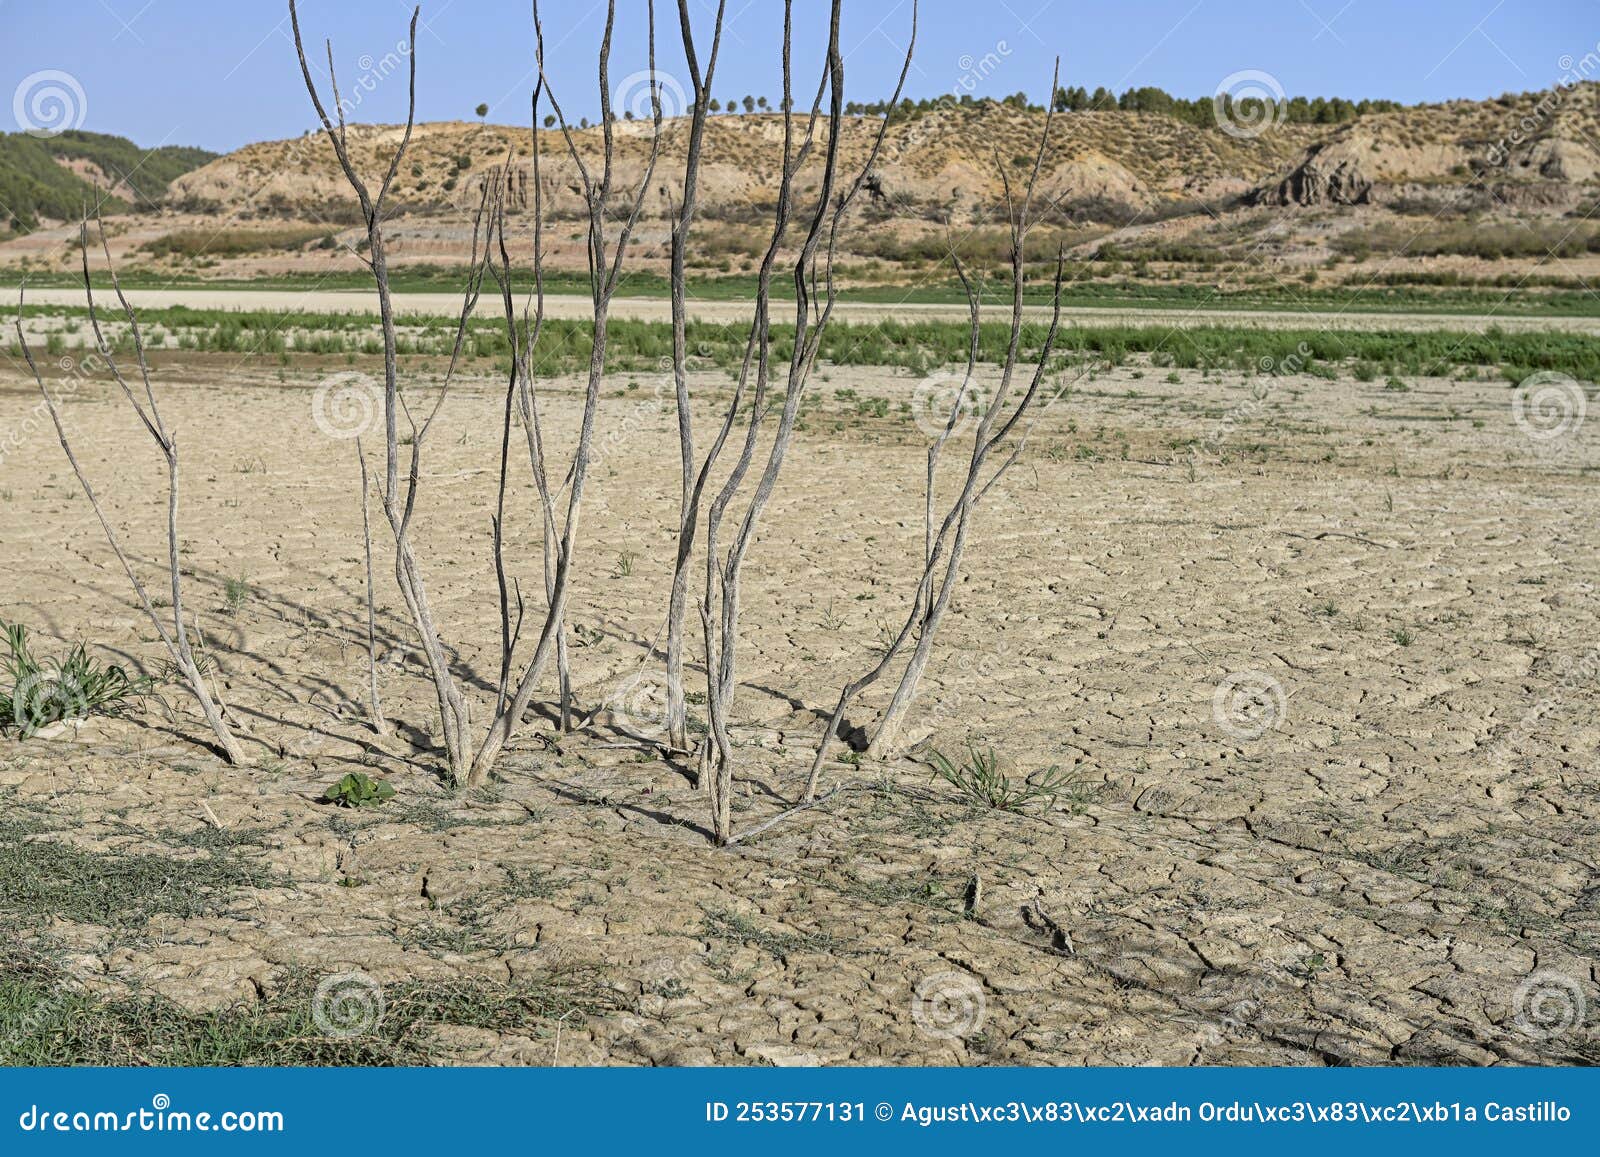 texture of dry land in southern europe. global warming and greenhouse effect